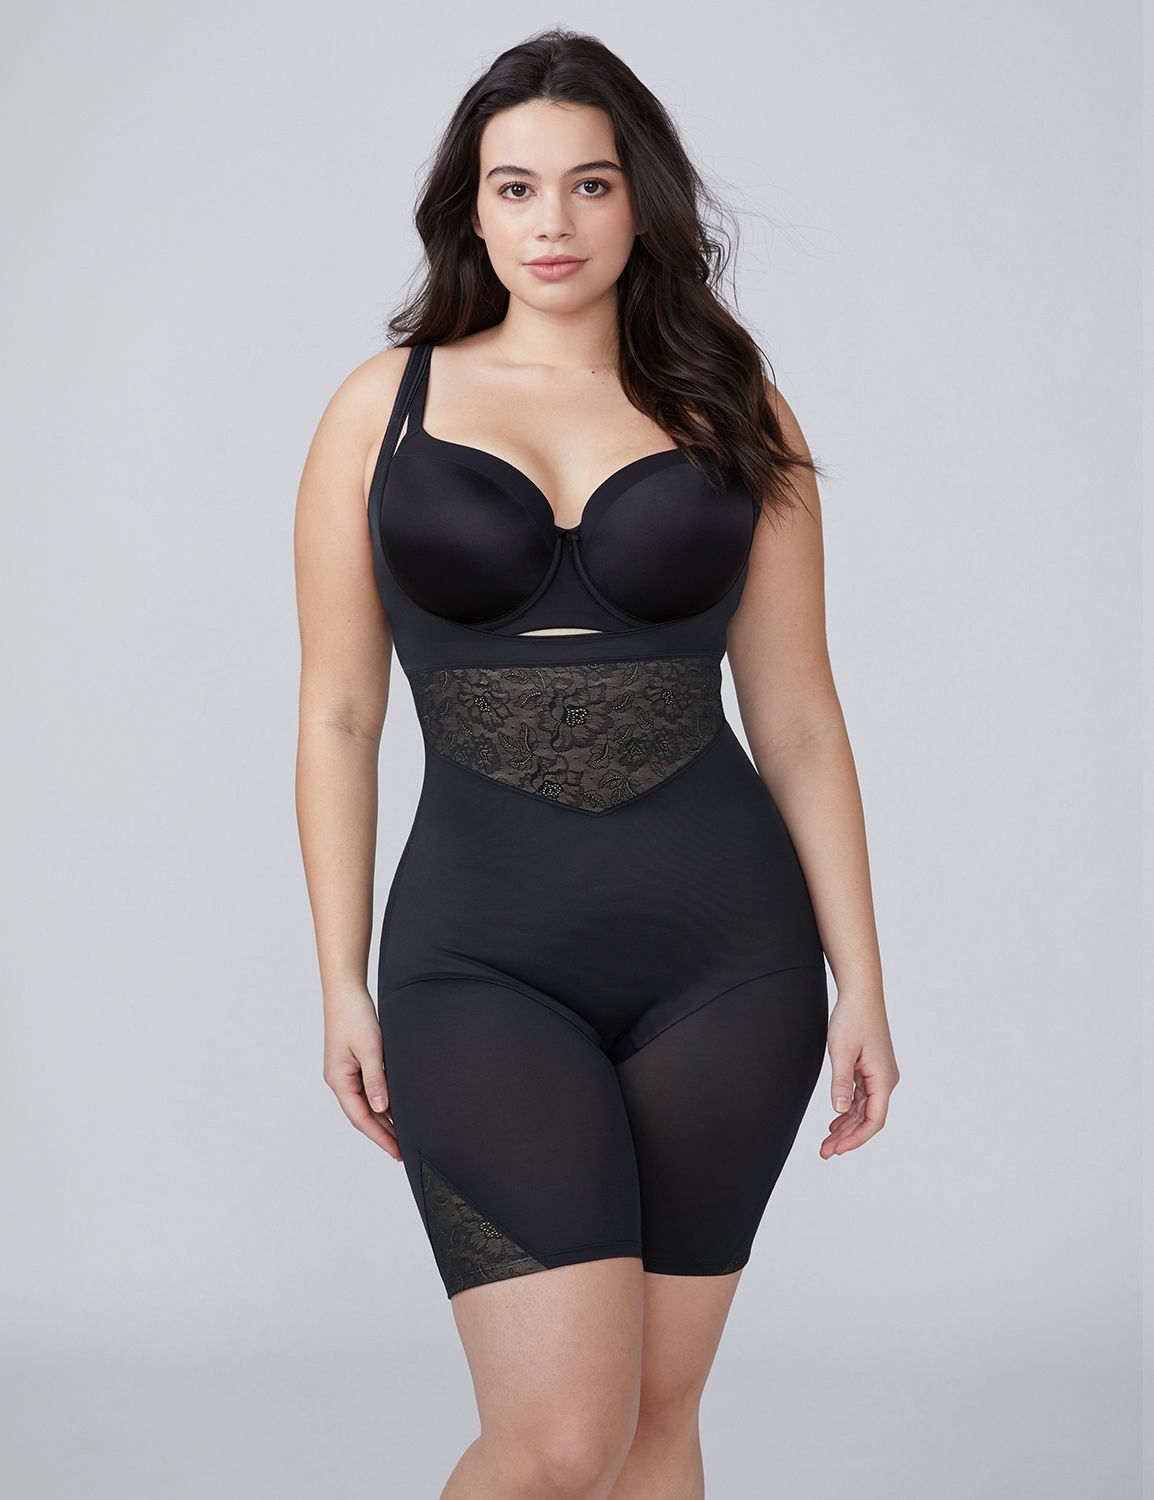 Lane Bryant Womens Shape By Cacique Open-Bust Thigh Shaper 26/28 Black, Trendy Plus Size Clothing